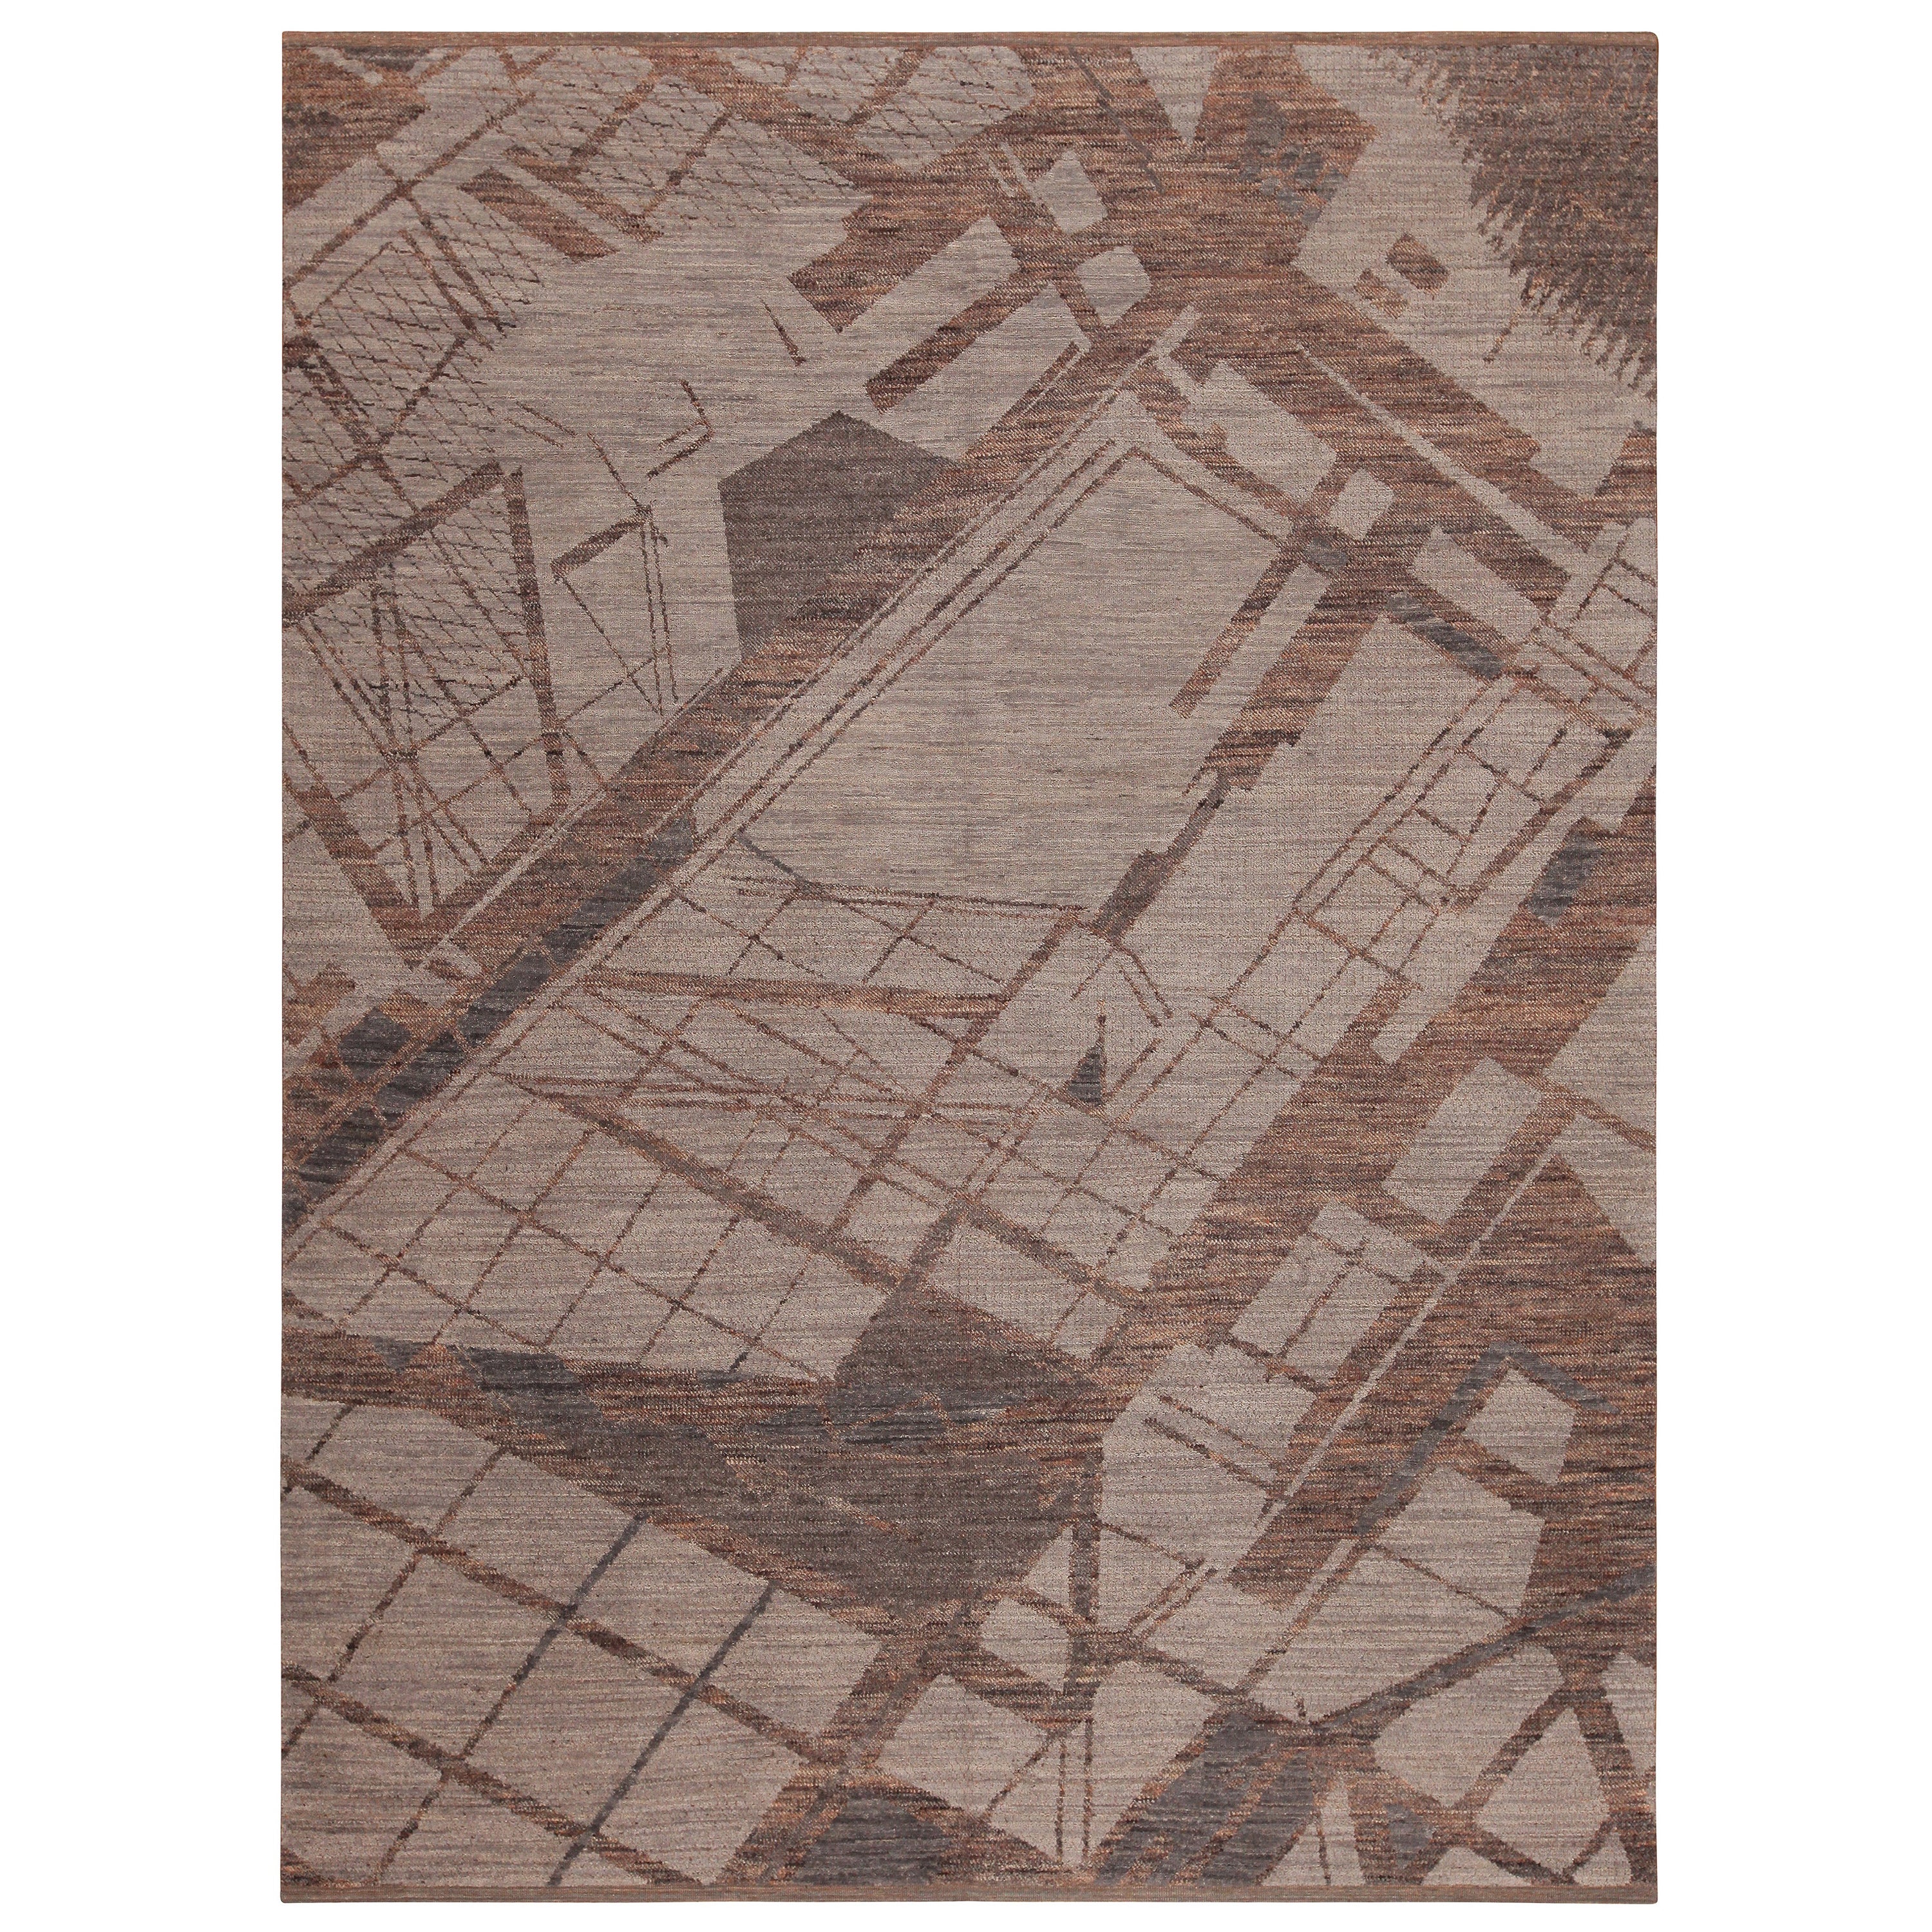 Nazmiyal Collection Modern Transitional Rug. 7 ft 5 in x 10 ft For Sale